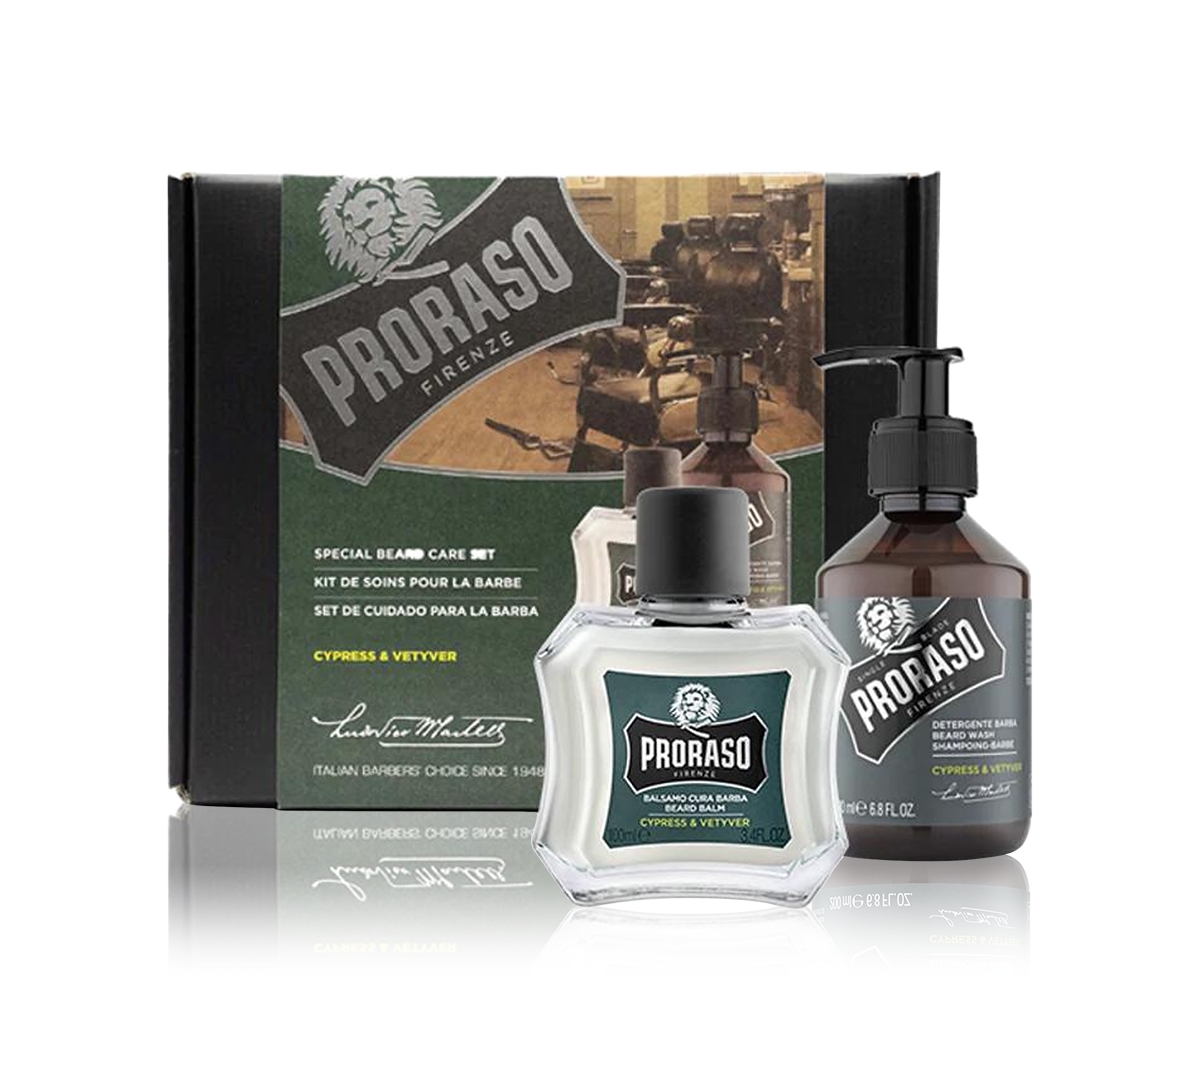 Proraso 2-pc. Beard Care Set For New Or Short Beards - Cypress & Vetyver Scent